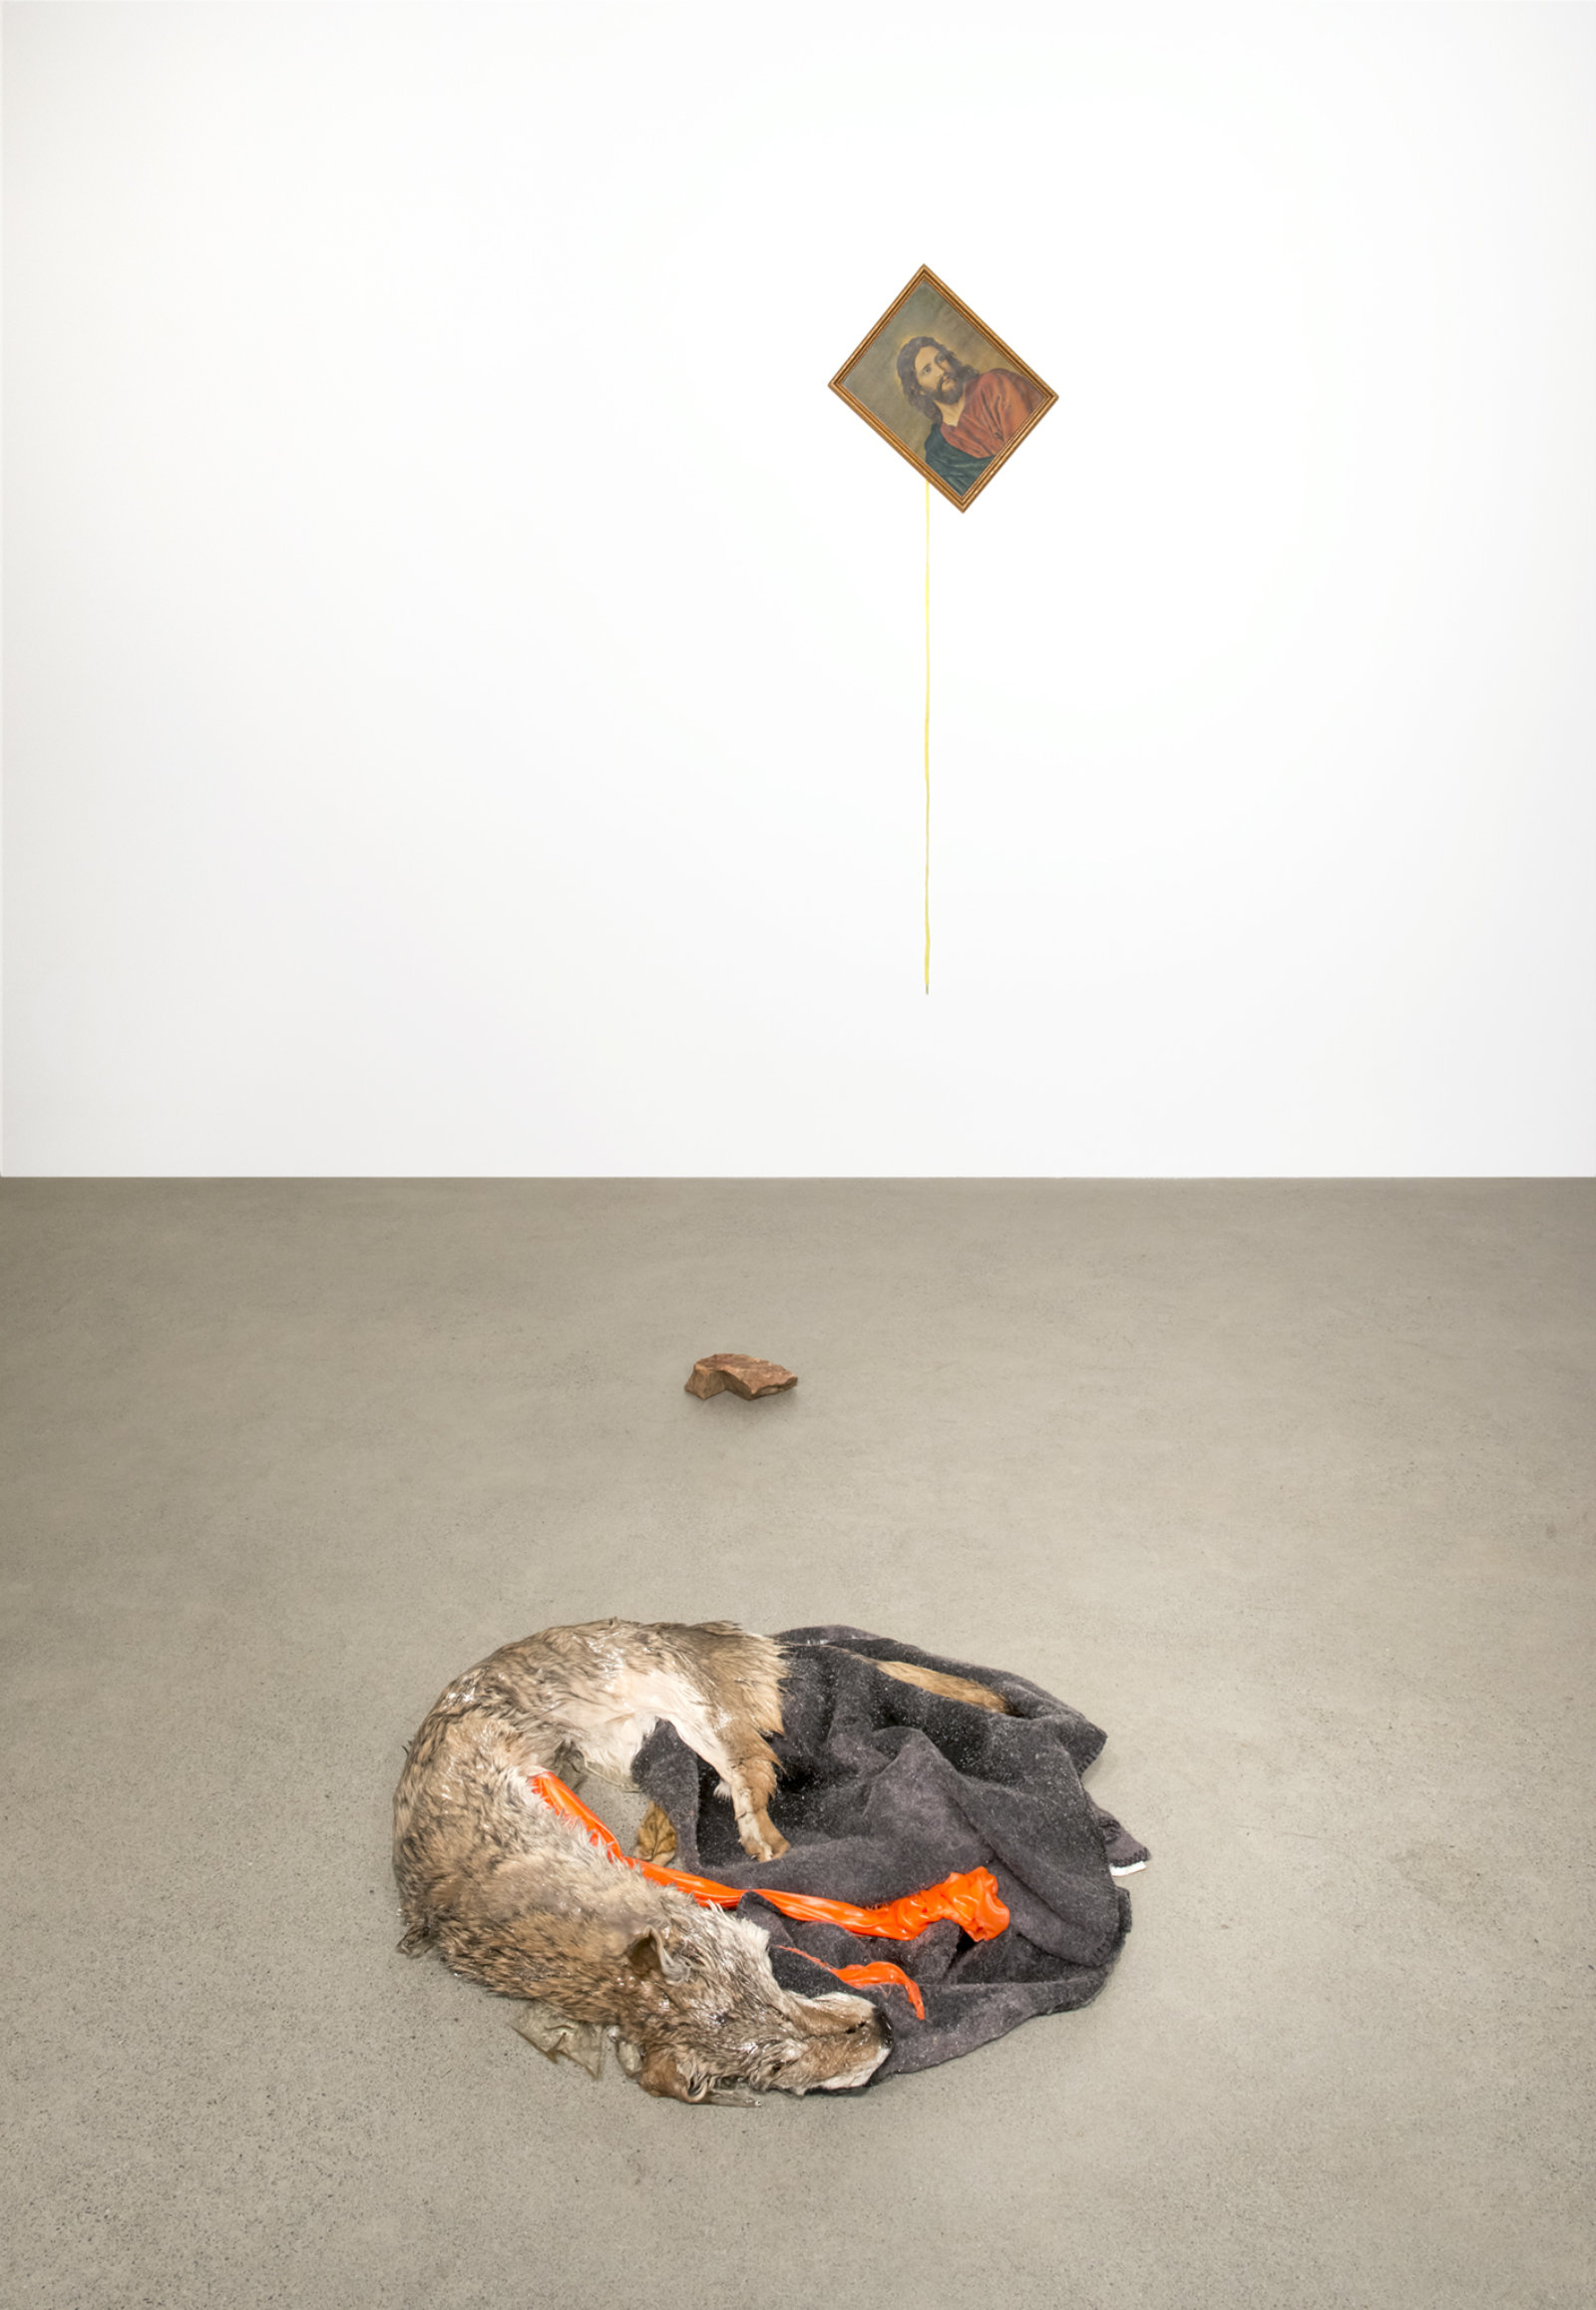 Duane Linklater, Torpor, 2016, coyote fur, wool blanket, polyester cloth, resin, found picture, shoelace, brick, dimensions variable